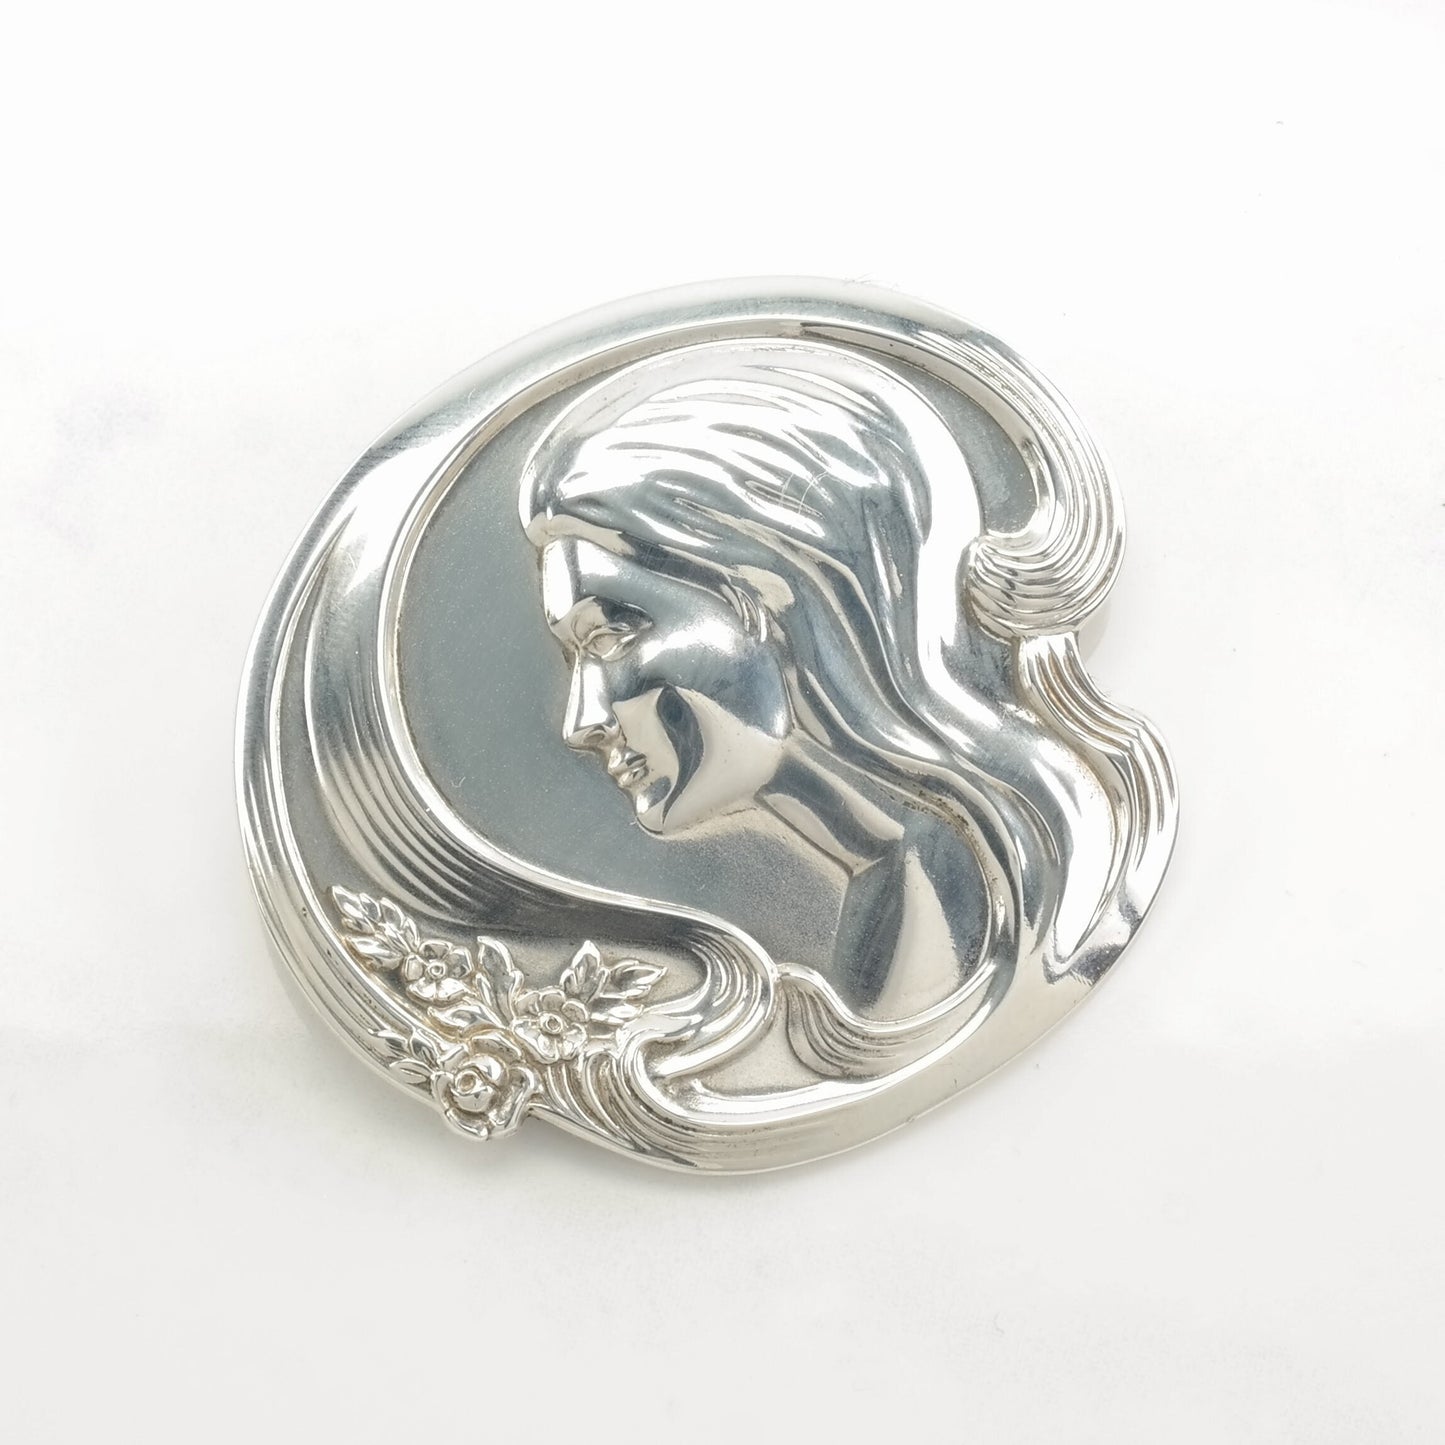 Lunt Sterling Silver Brooch Pendant Mother's Day